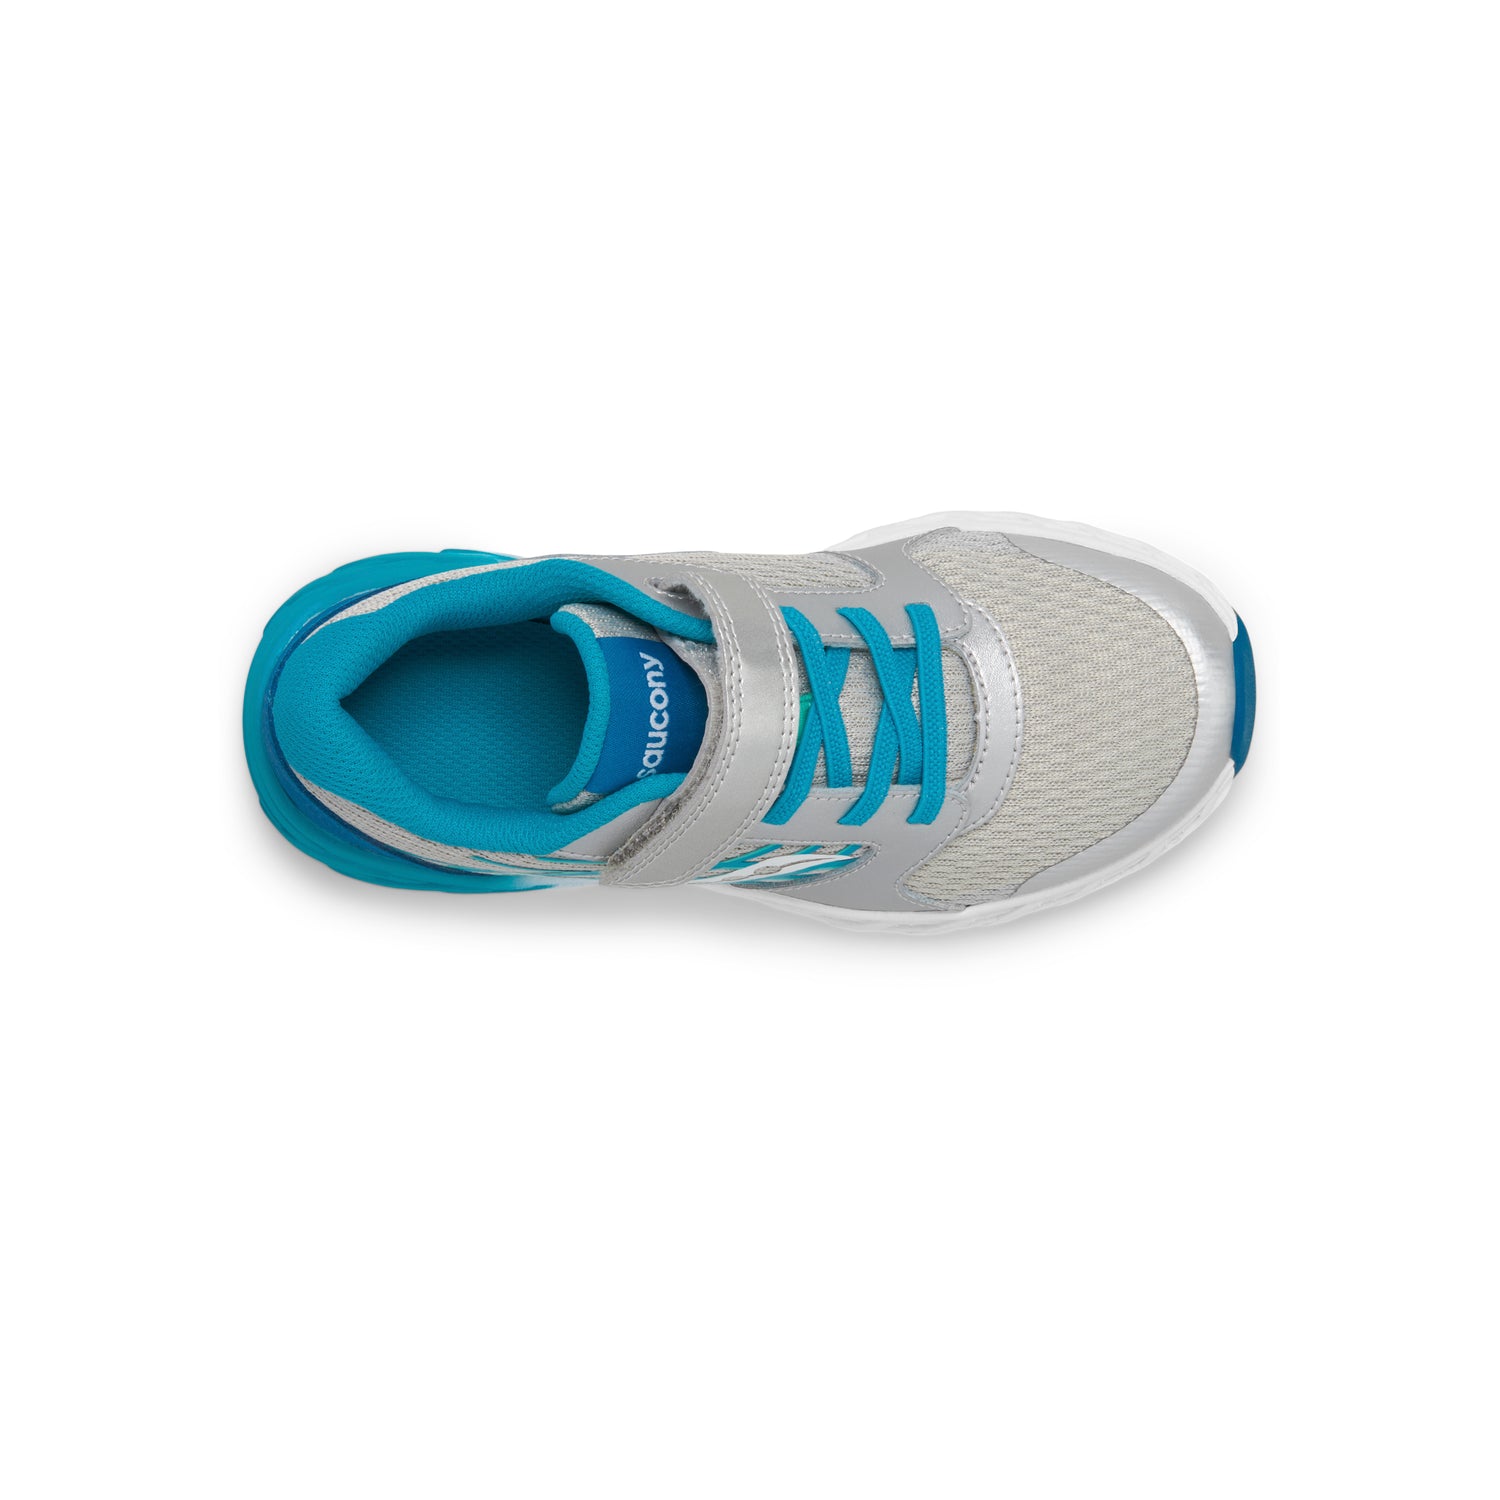 Wind A/C 2.0 Sneaker Turquoise/Silver